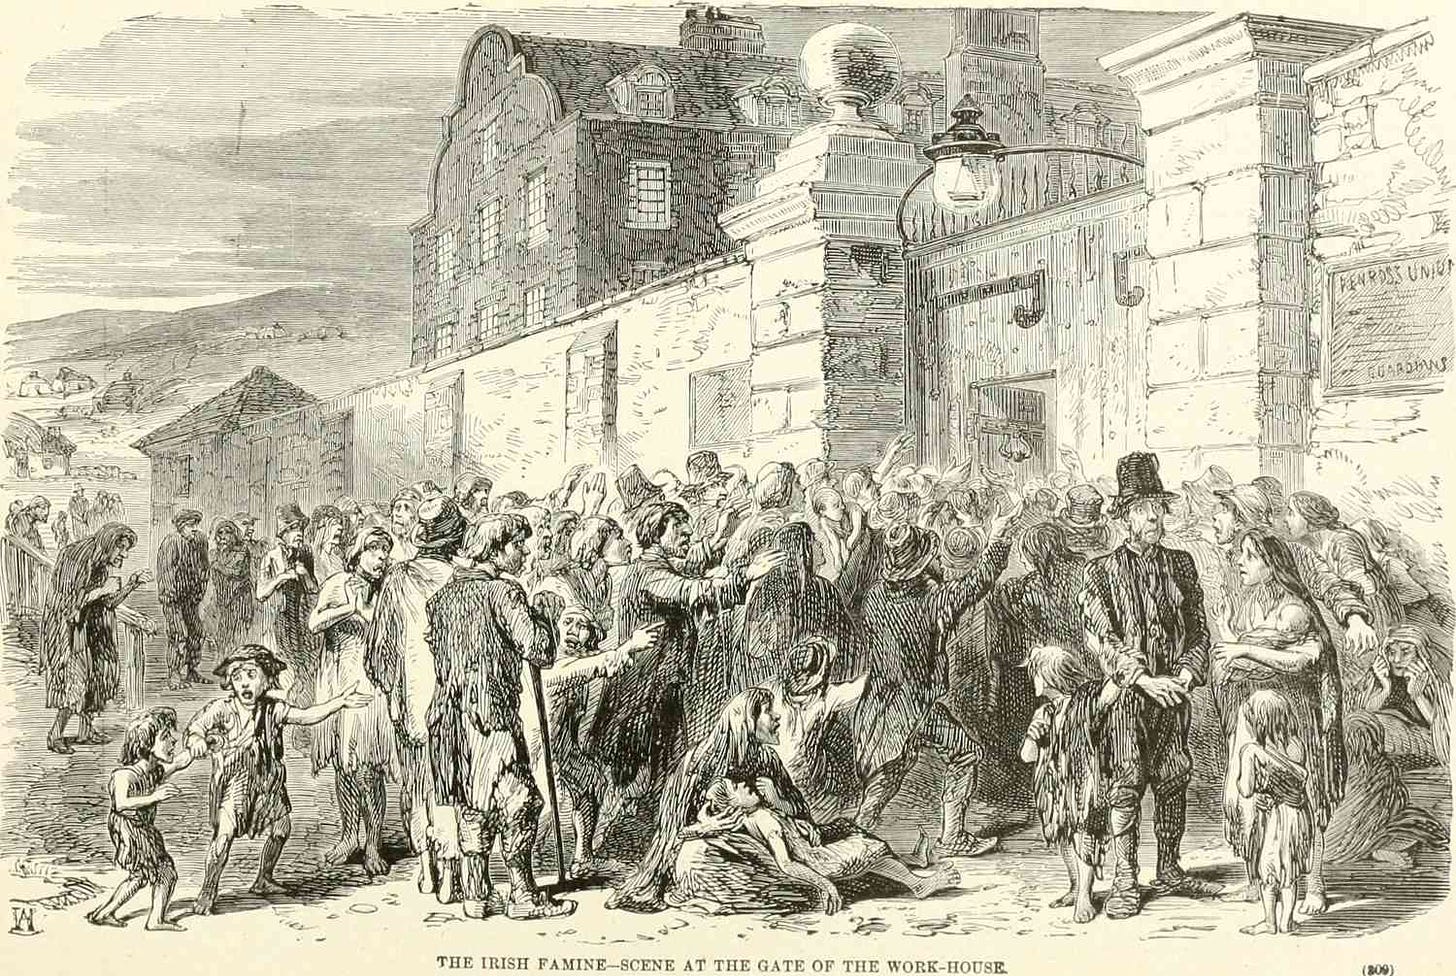 The Great Irish Famine Was a Turning Point in History